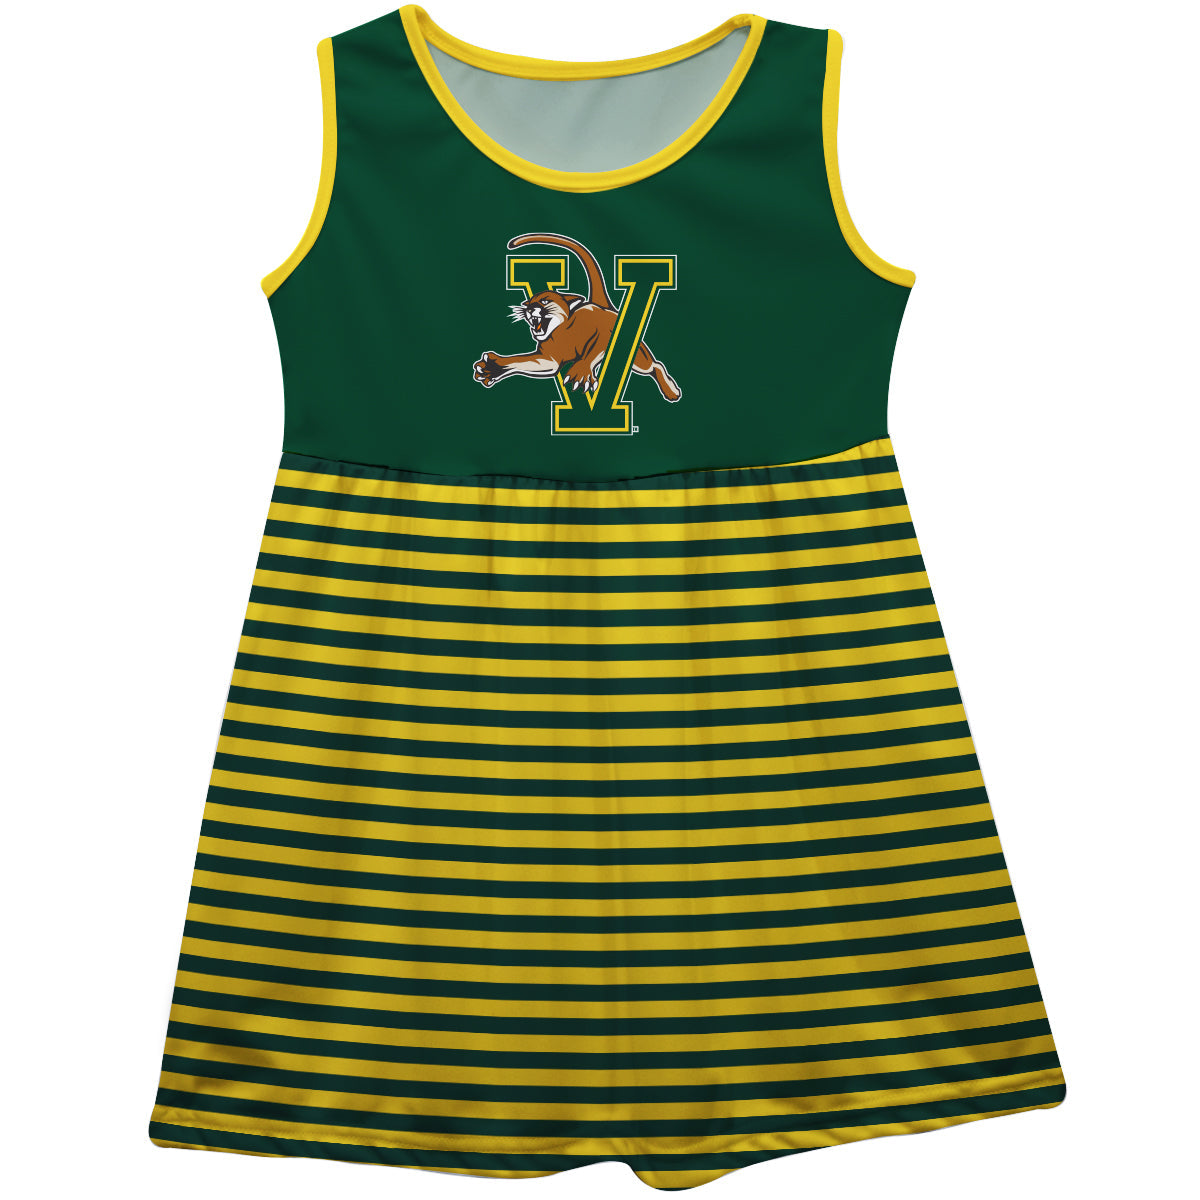 Vermont Catamounts Girls Game Day Sleeveless Tank Dress Solid Green Logo Stripes on Skirt by Vive La Fete-Campus-Wardrobe